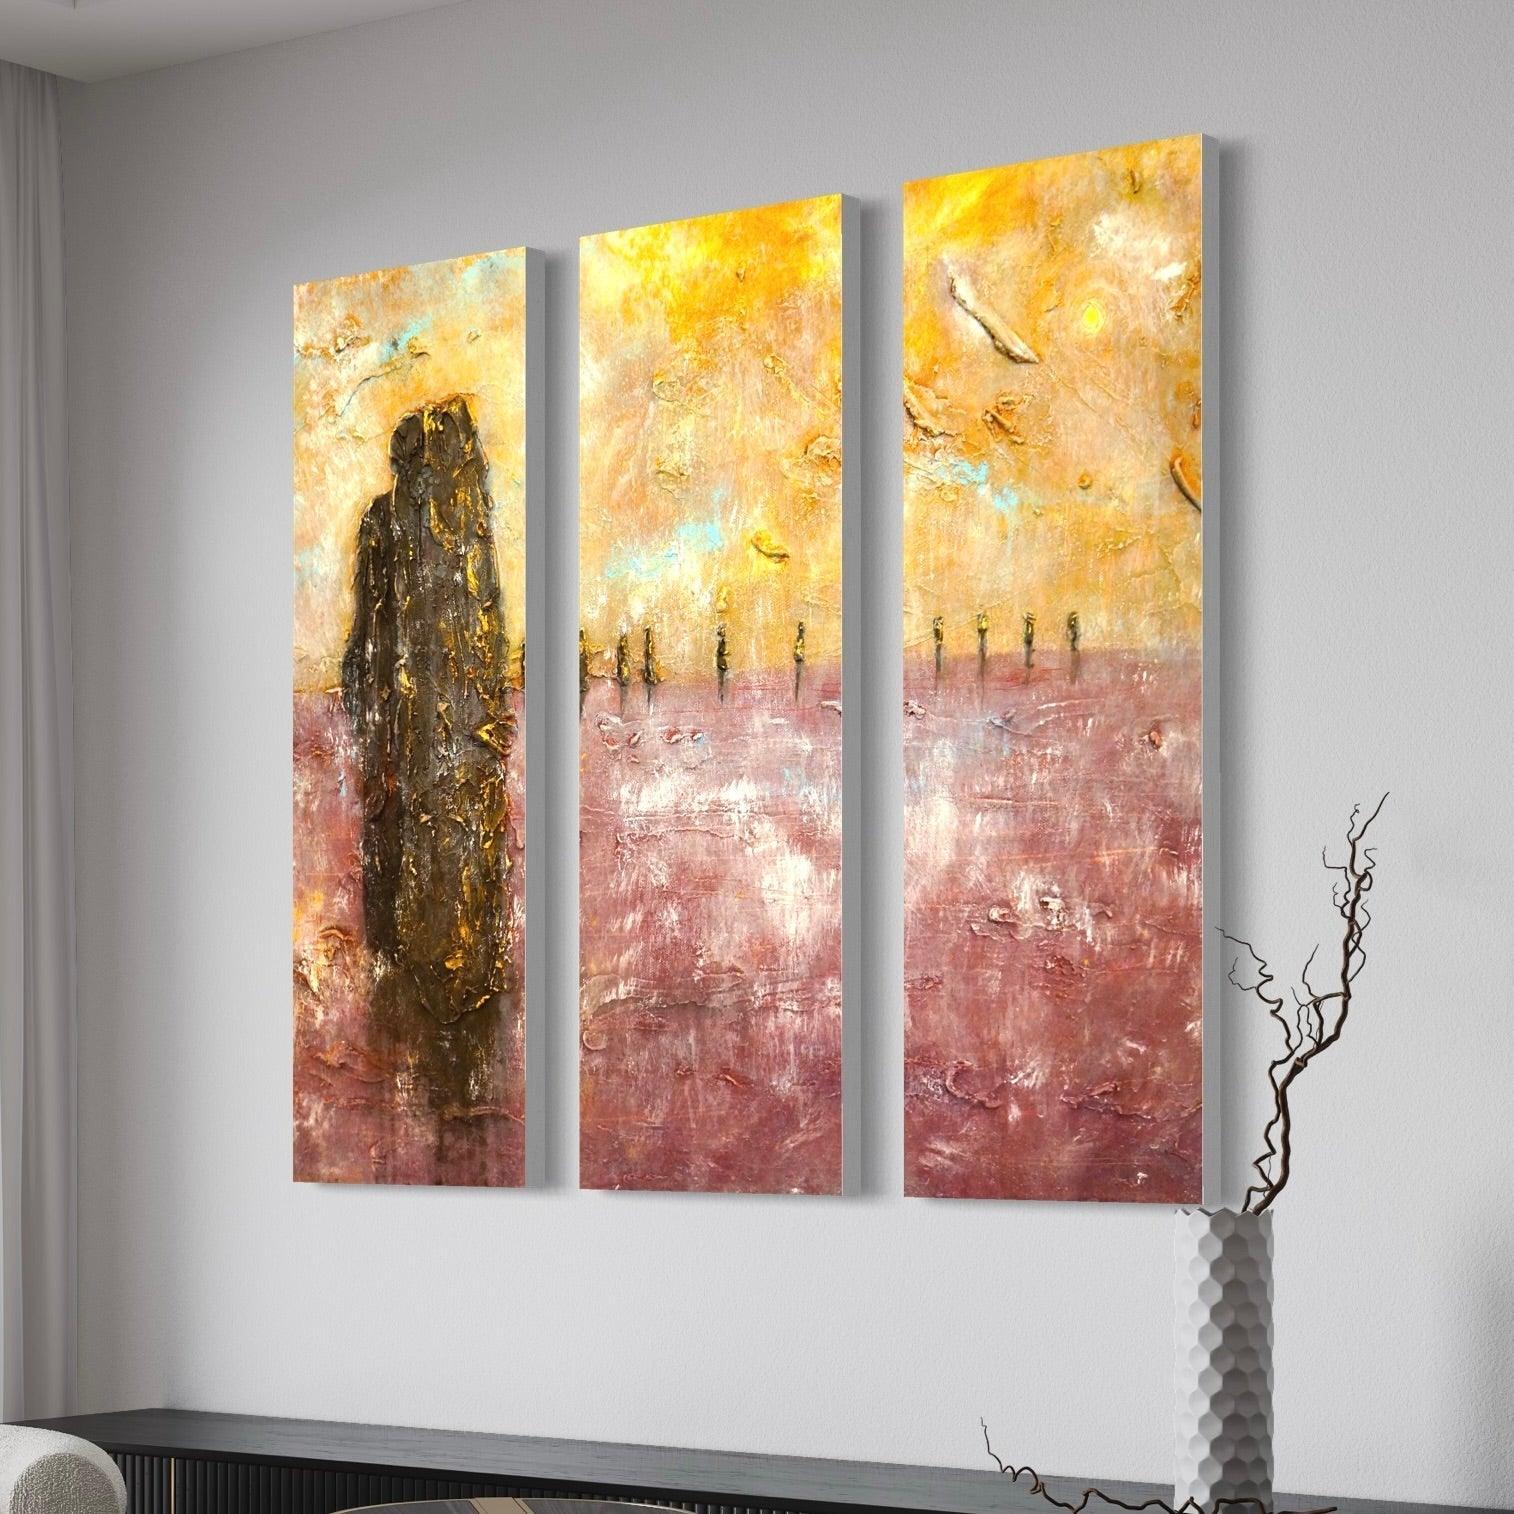 Brodgar Mist Orkney Painting Signed Fine Art Triptych Canvas-Statement Wall Art-Orkney Art Gallery-Paintings, Prints, Homeware, Art Gifts From Scotland By Scottish Artist Kevin Hunter